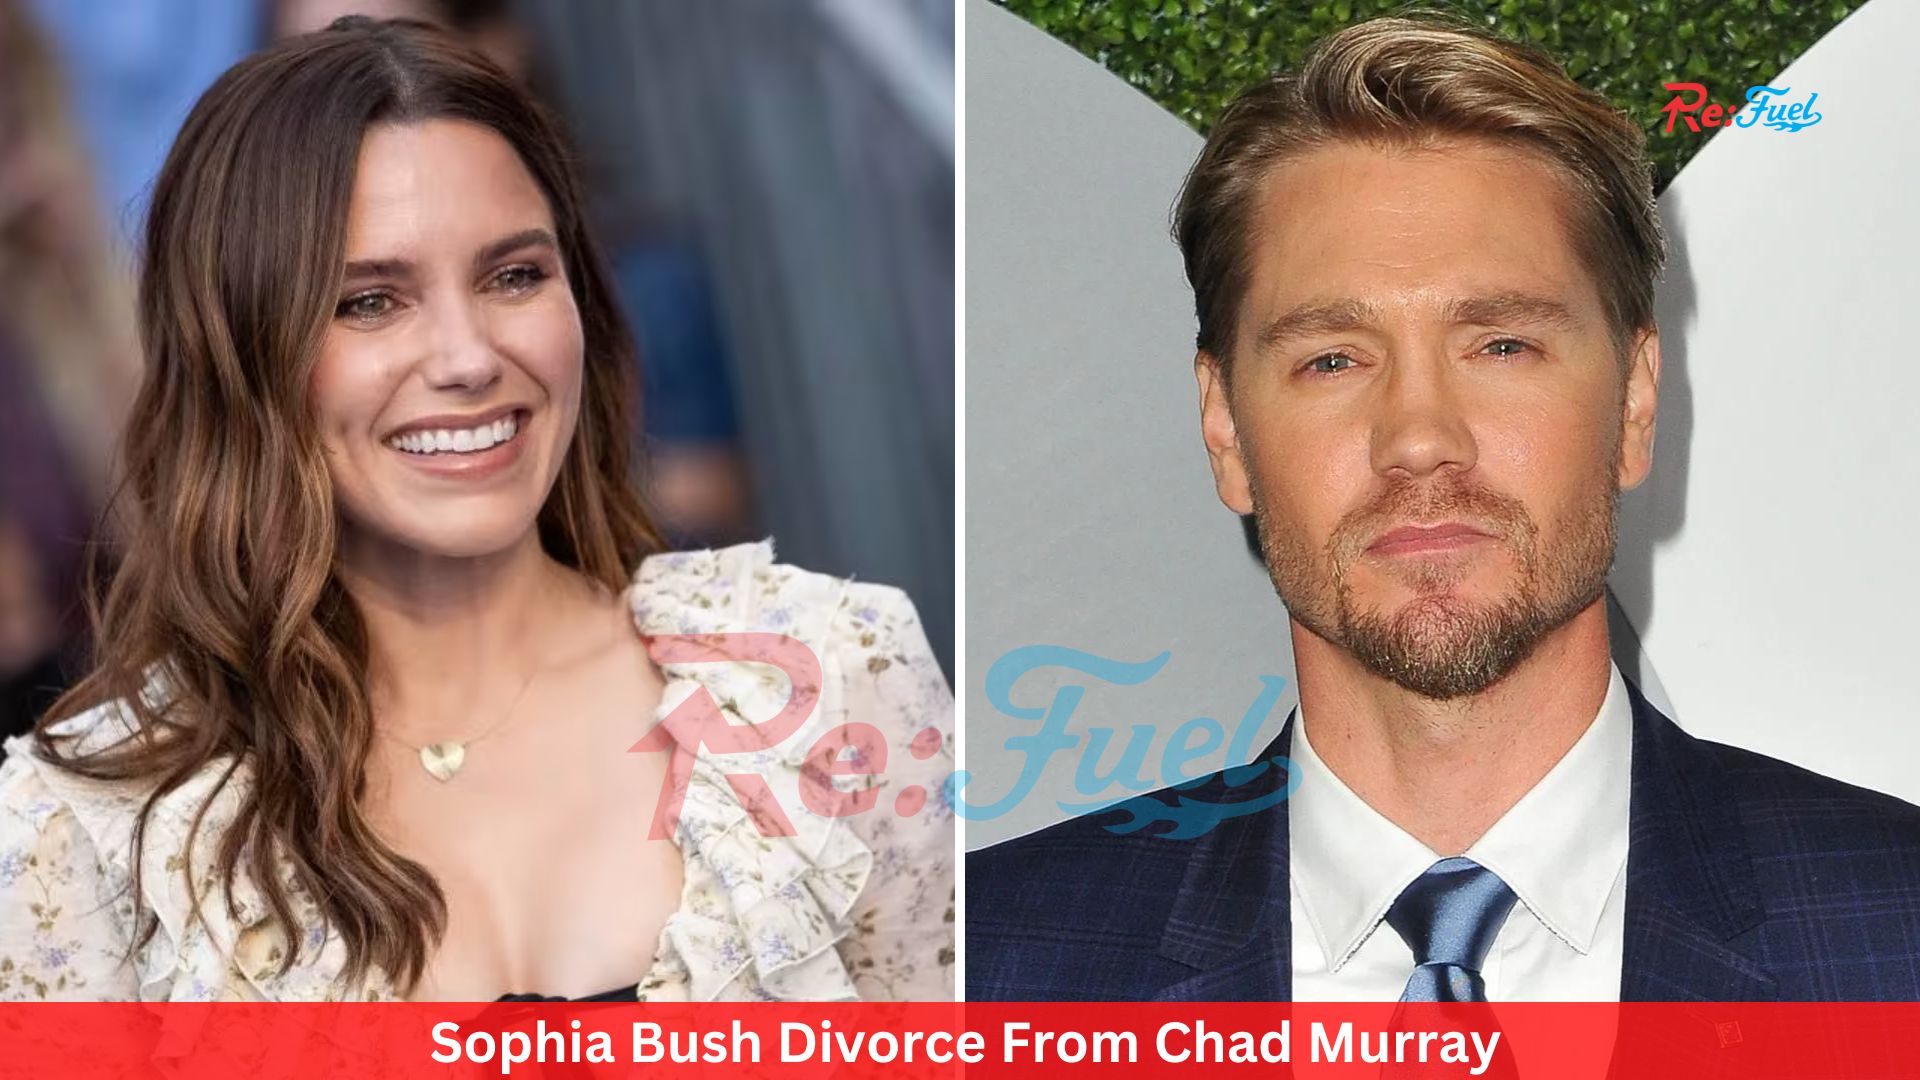 Sophia Bush Divorce From Chad Murray- Everything You Need To Know